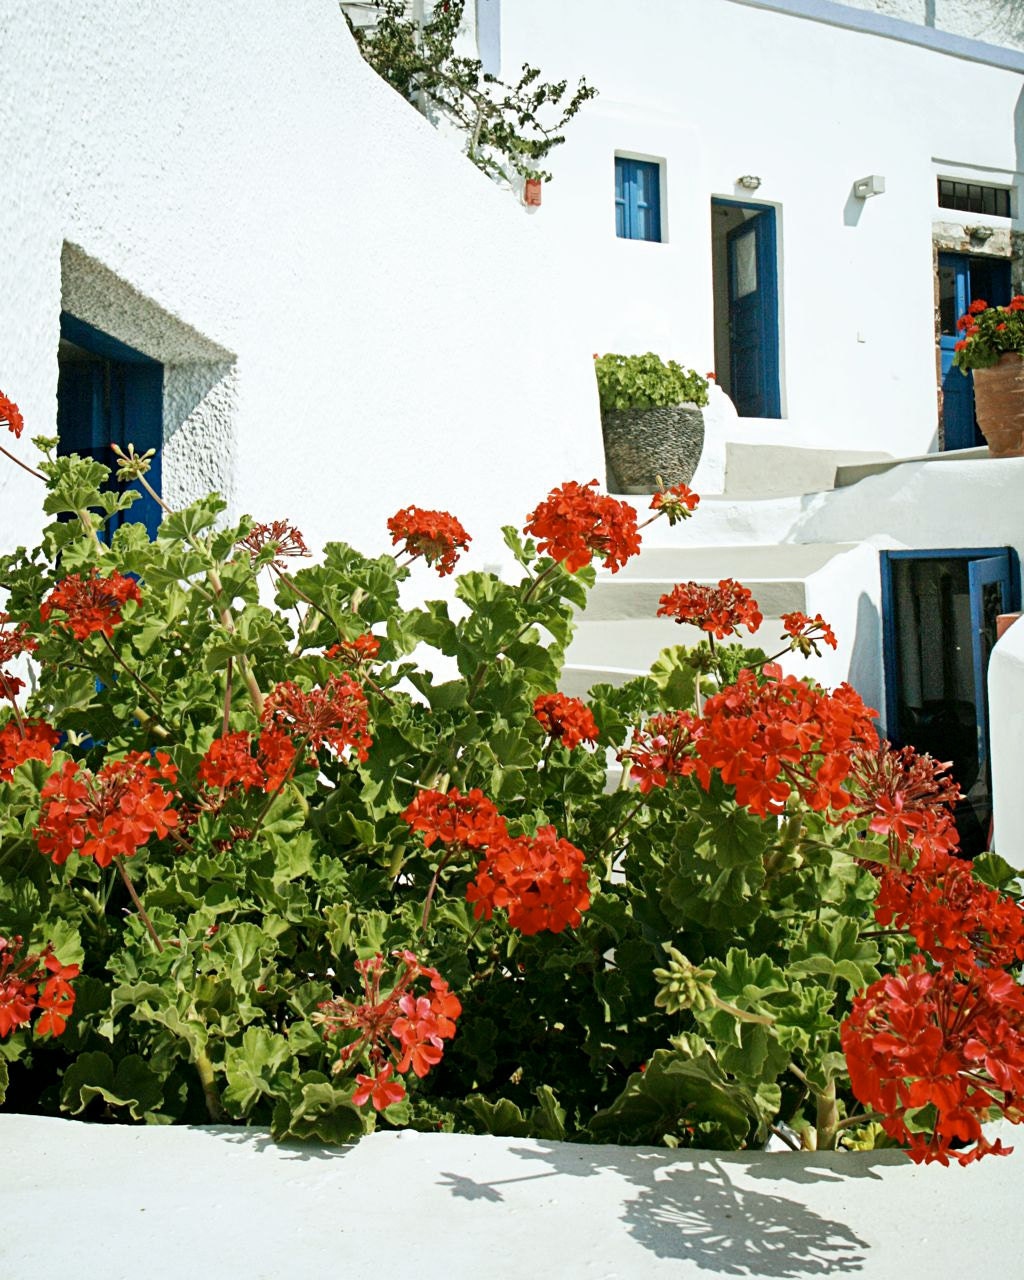 Greece Photography - Red Geraniums in Santorini - Greek Travel Photography - Mediterranean Home Decor - Wall Art - Red White Green